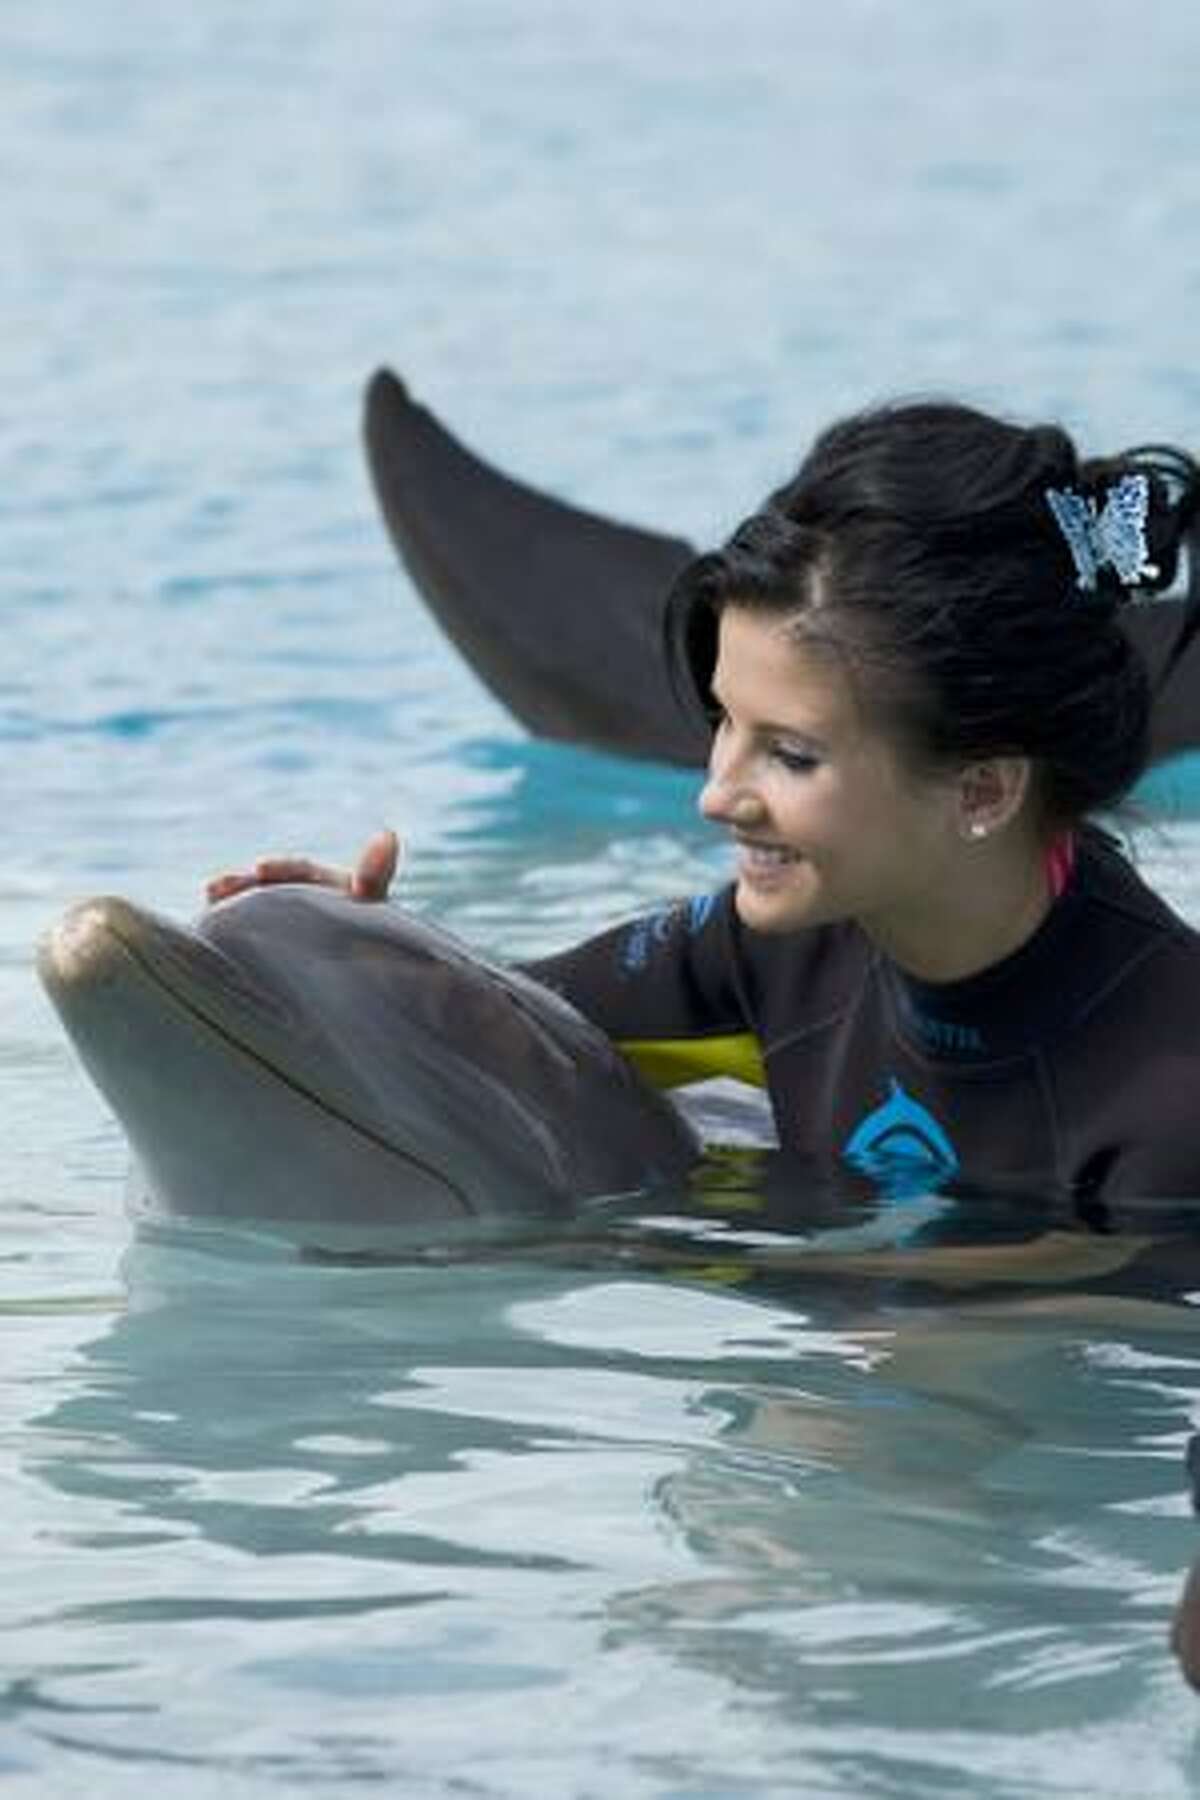 Larissa Costa, Miss Brazil, pets a dolphin while in Dolphin Cay at Atlantis.